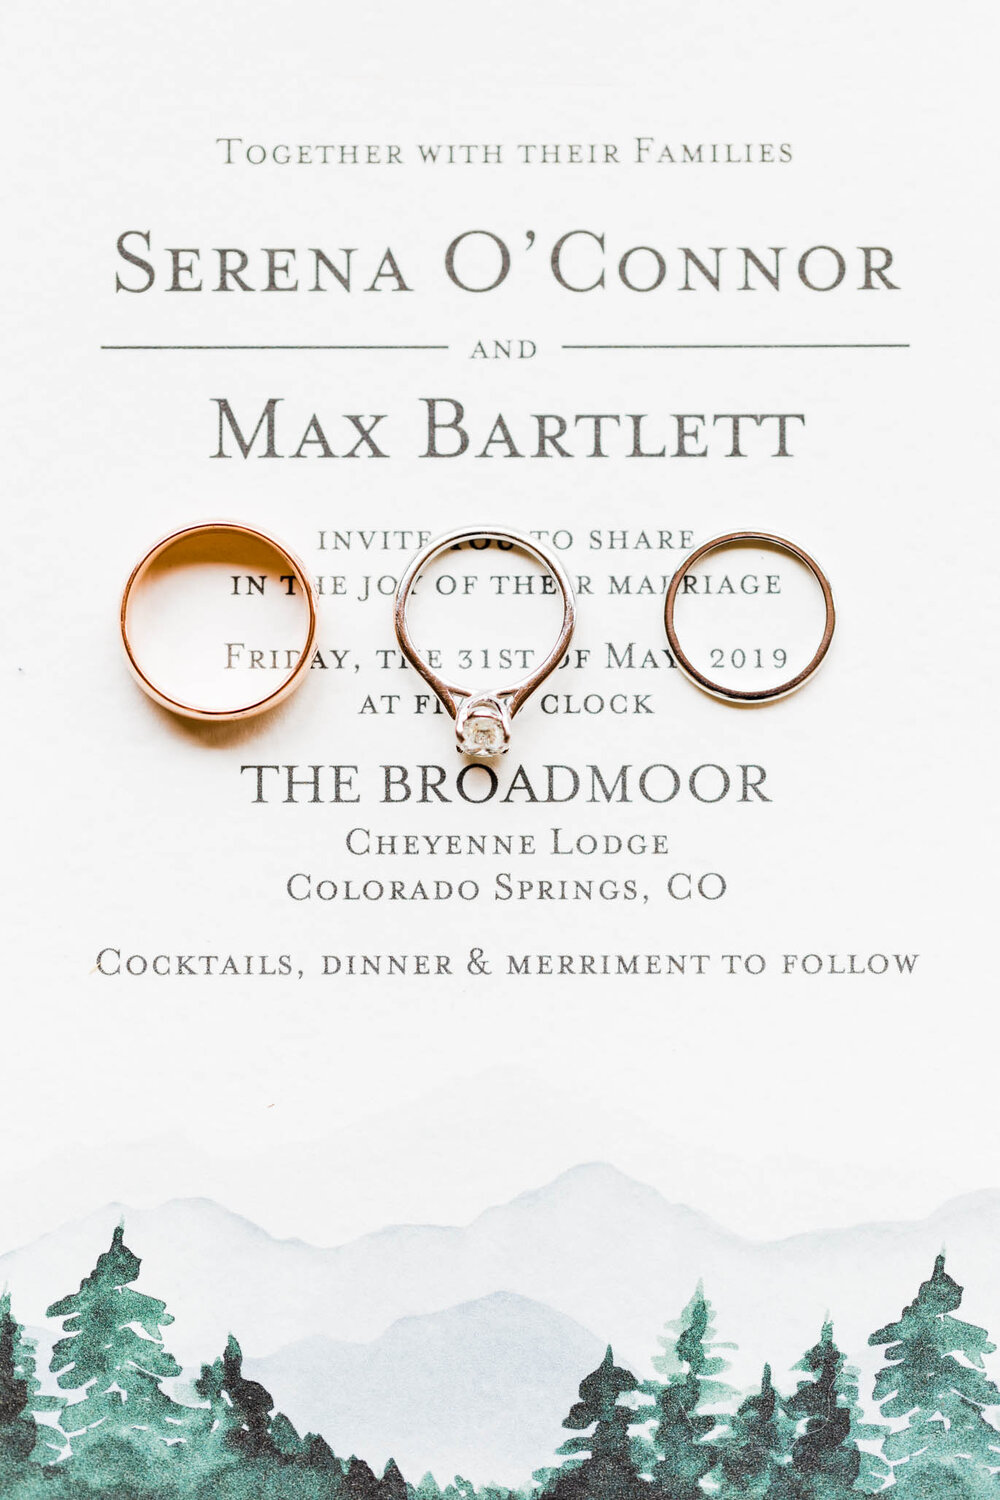 Their invitation suite was a perfect reflection of the mountainous backdrop at Cheyenne Lodge, The Broadmoor.